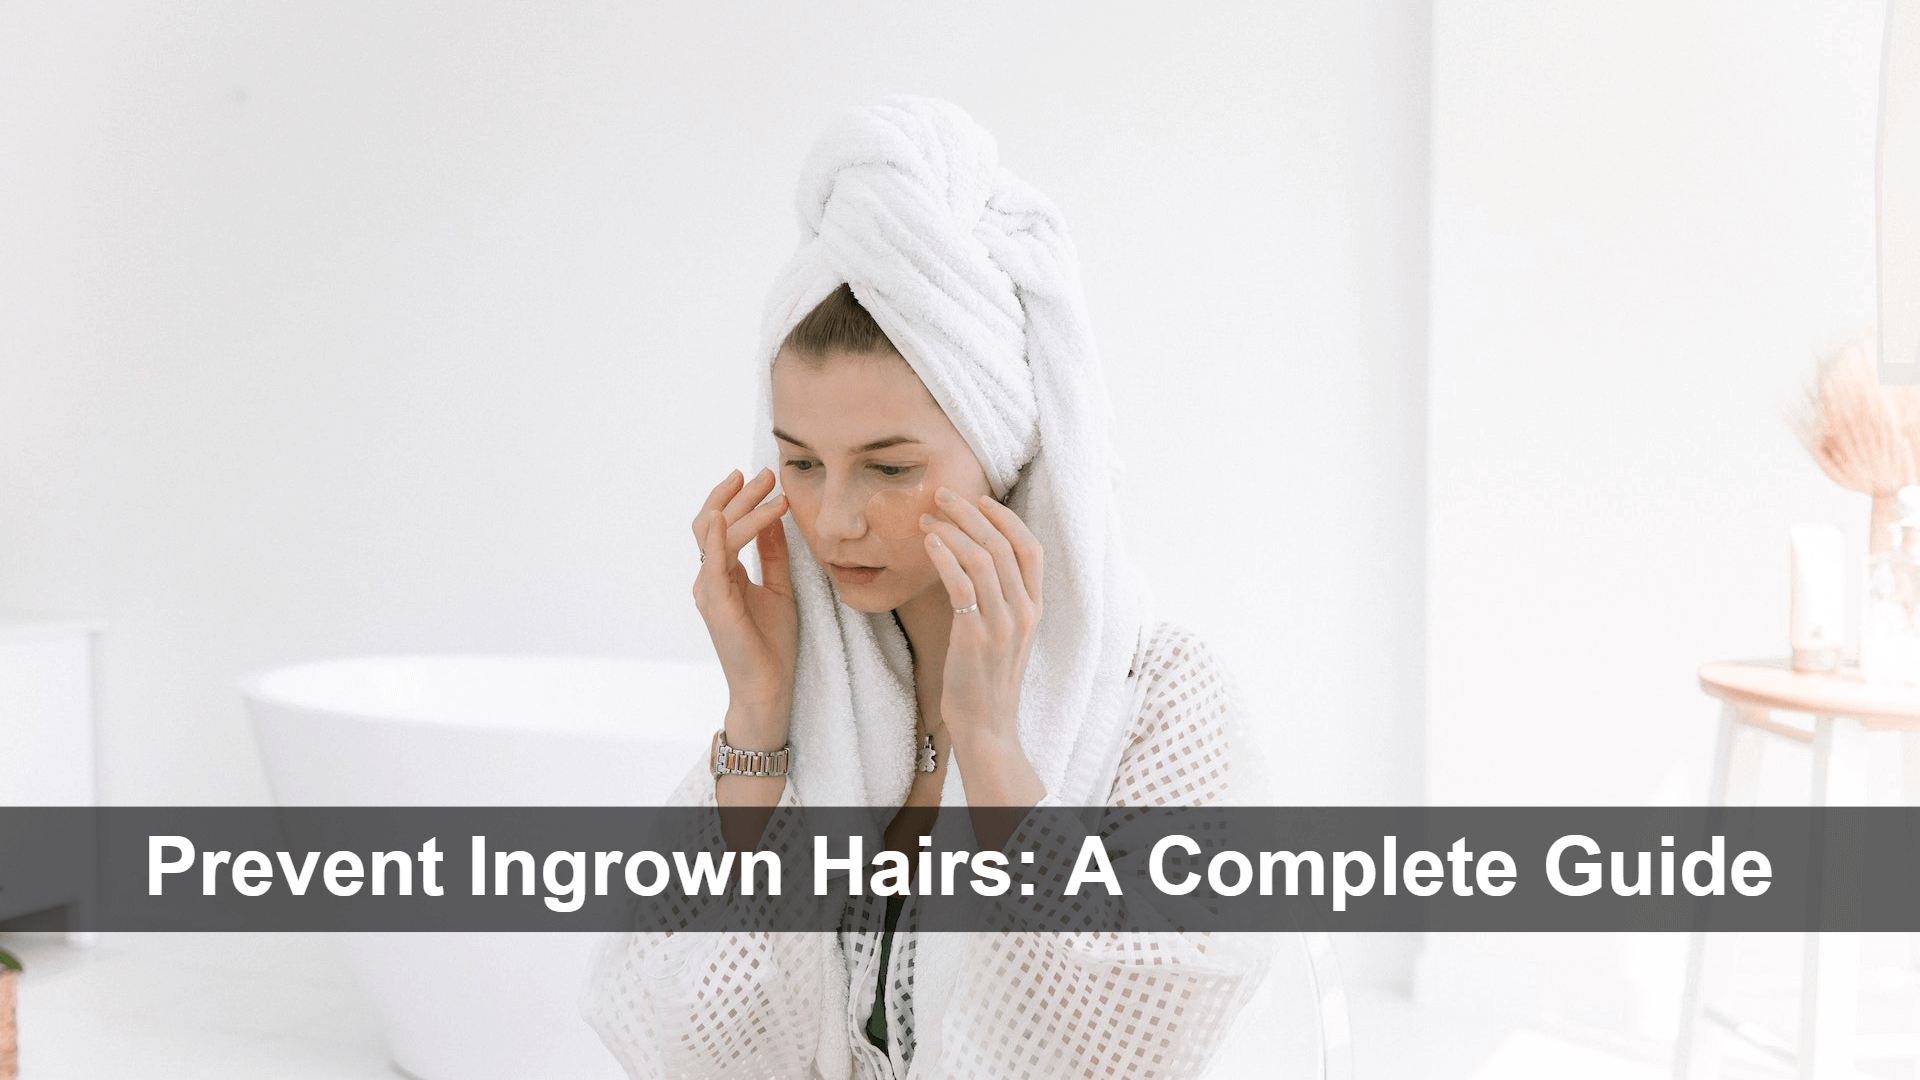 How to Prevent Ingrown Hairs 101: Tips and Tricks